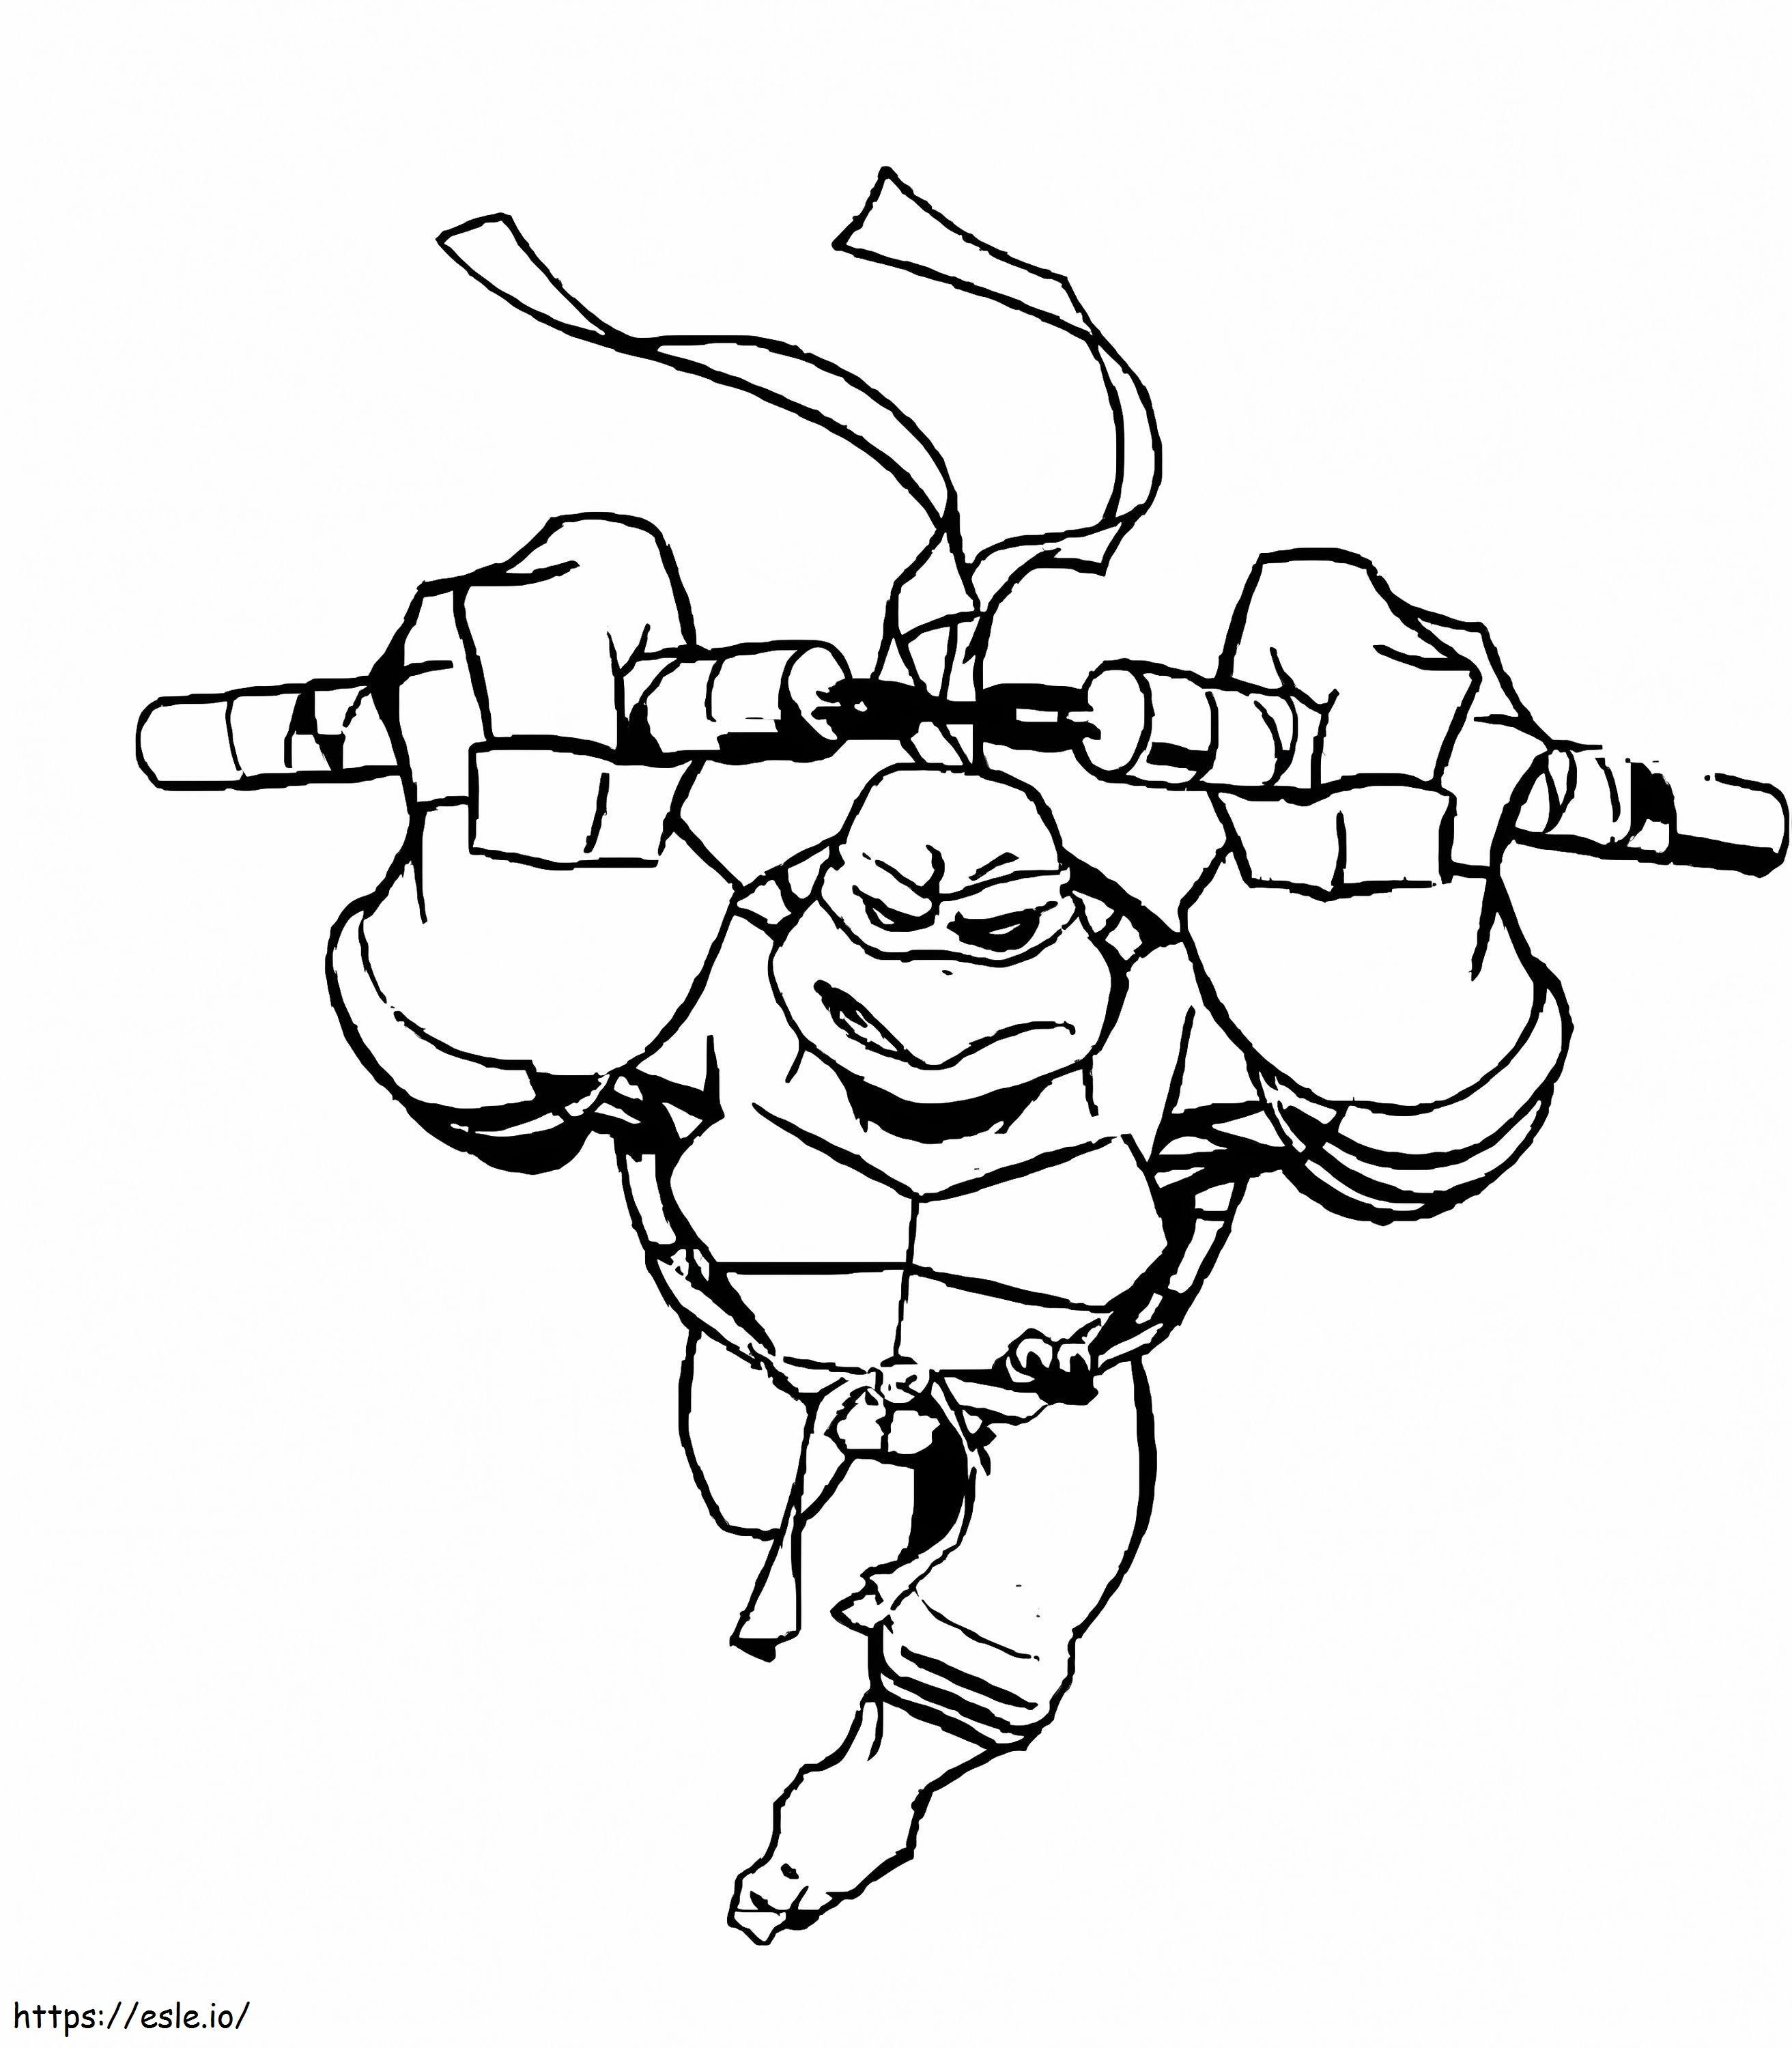 Action Michelangelo coloring page